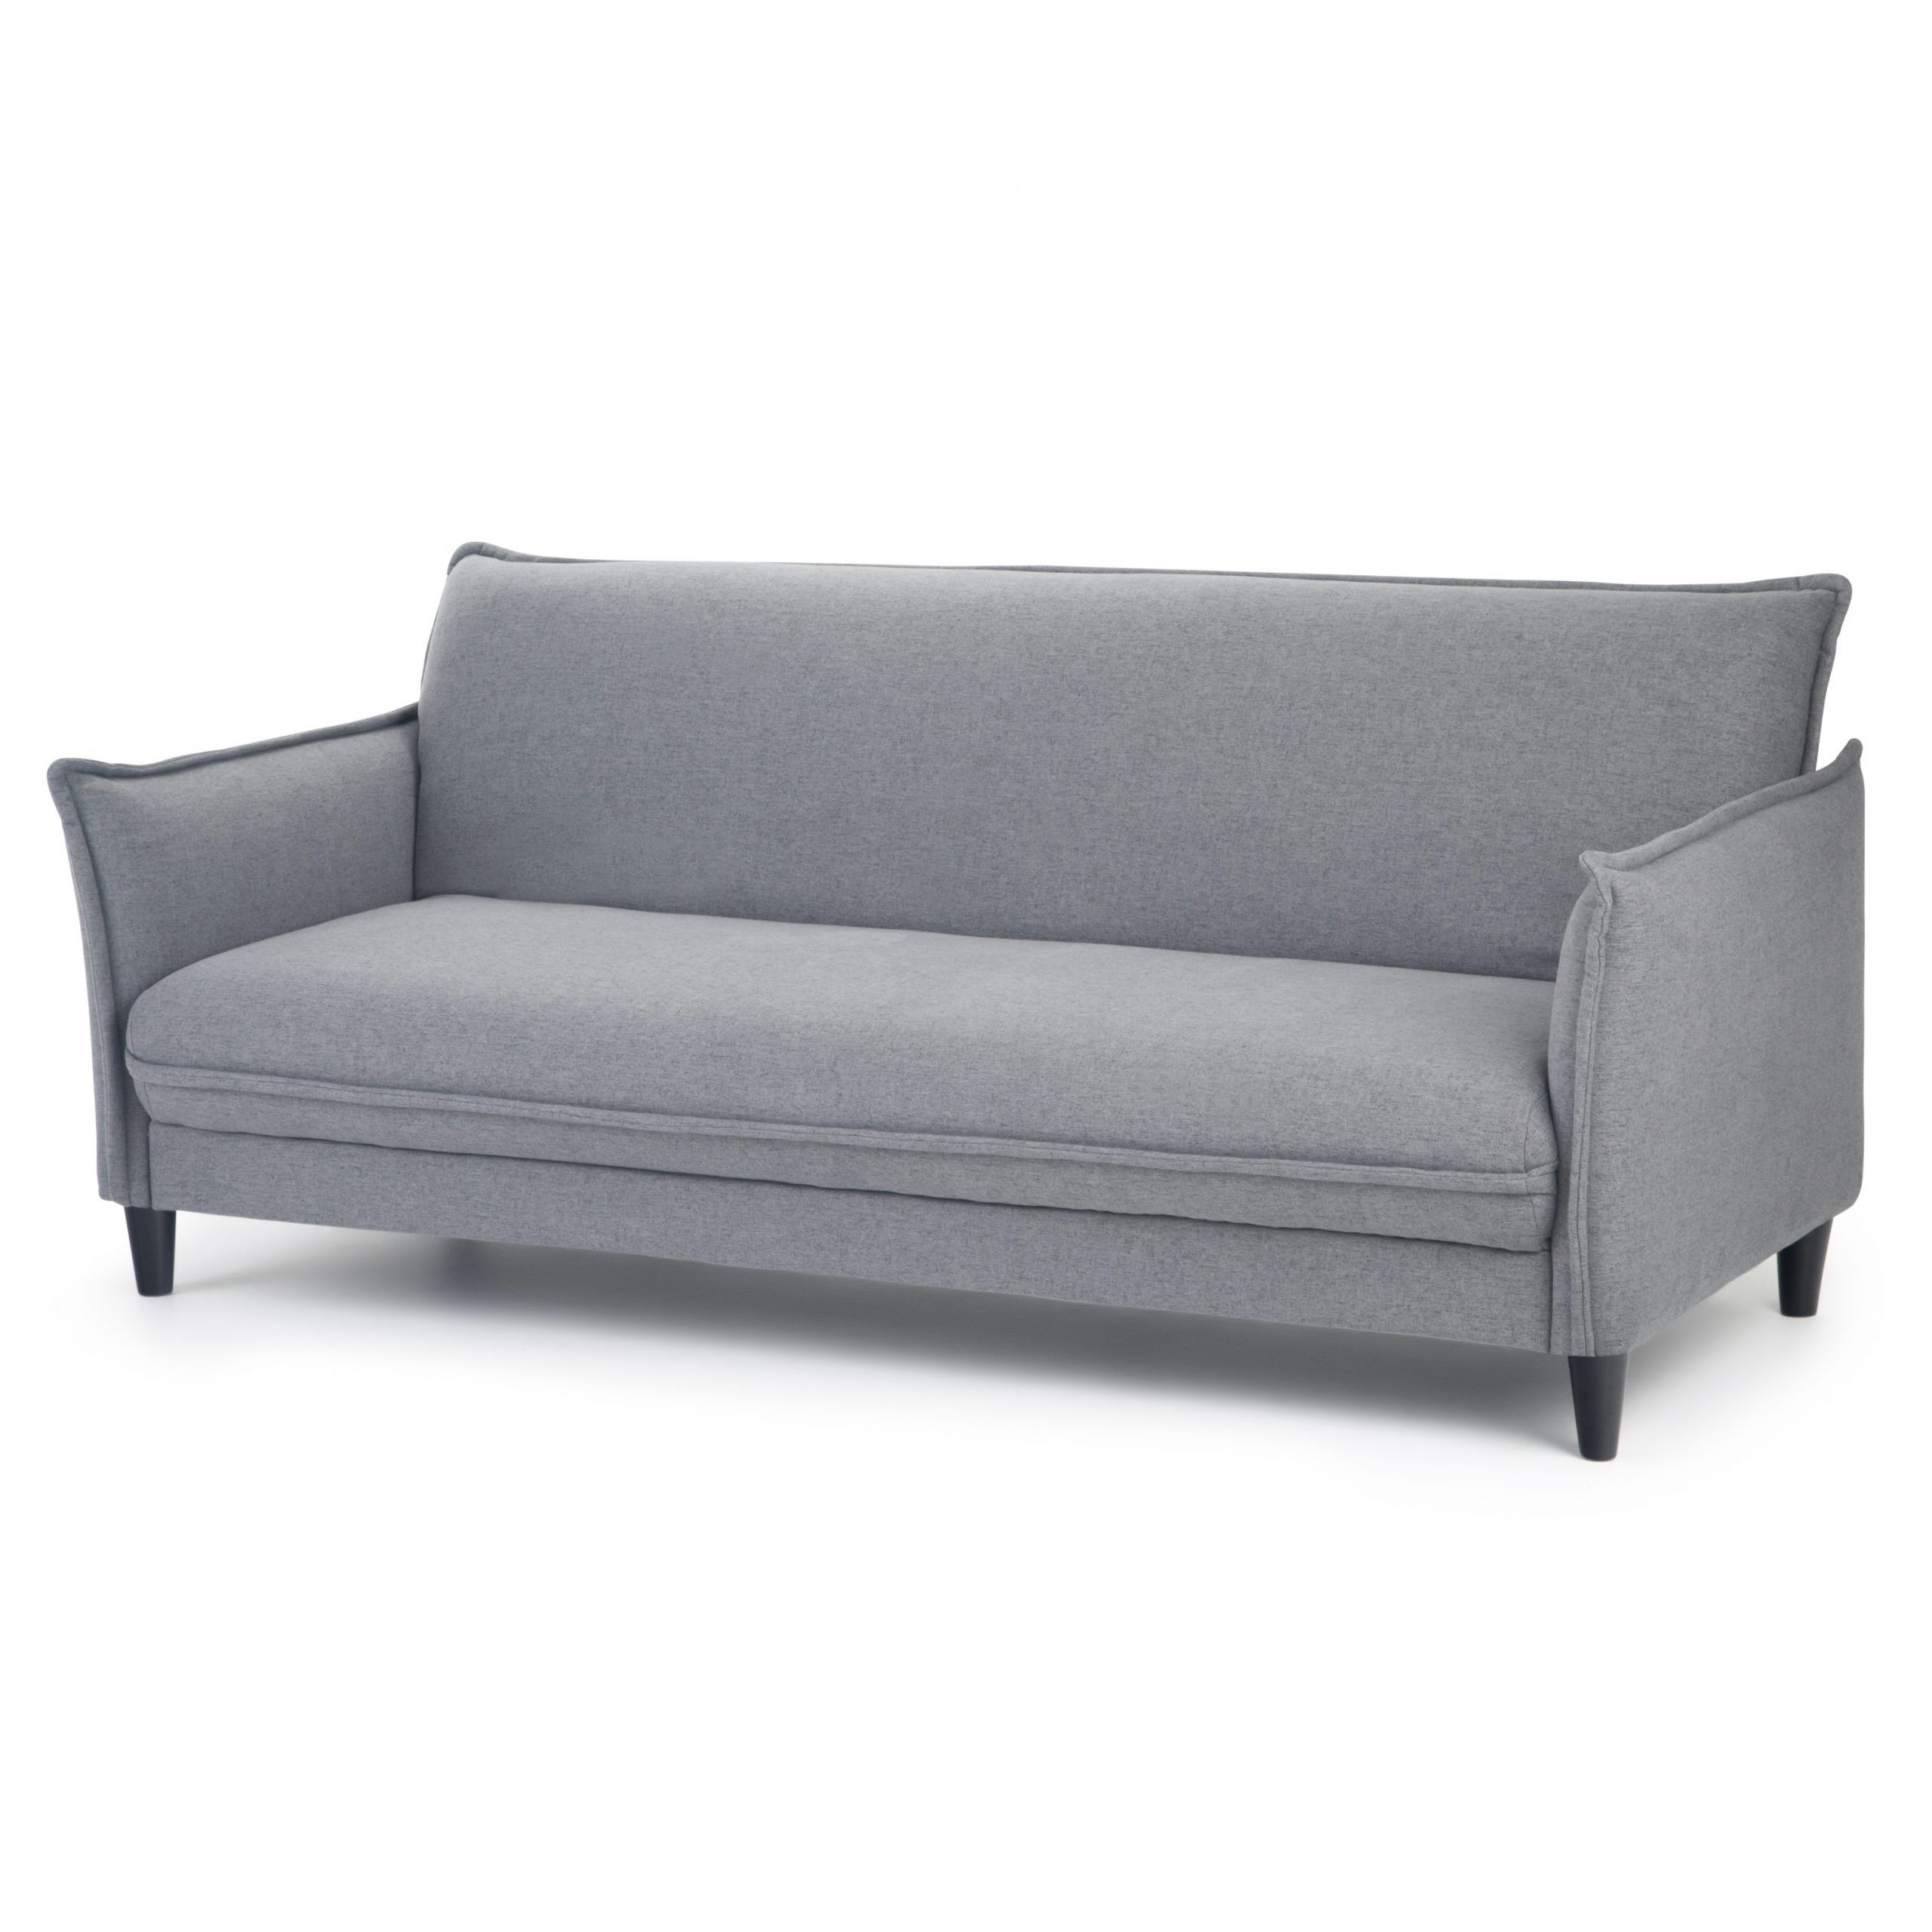 Brooklyn + Max Danville Contemporary 81 Inch Wide Sofa Bed With Gneiss Modern Linen Sectional Sofas Slate Gray (View 1 of 15)